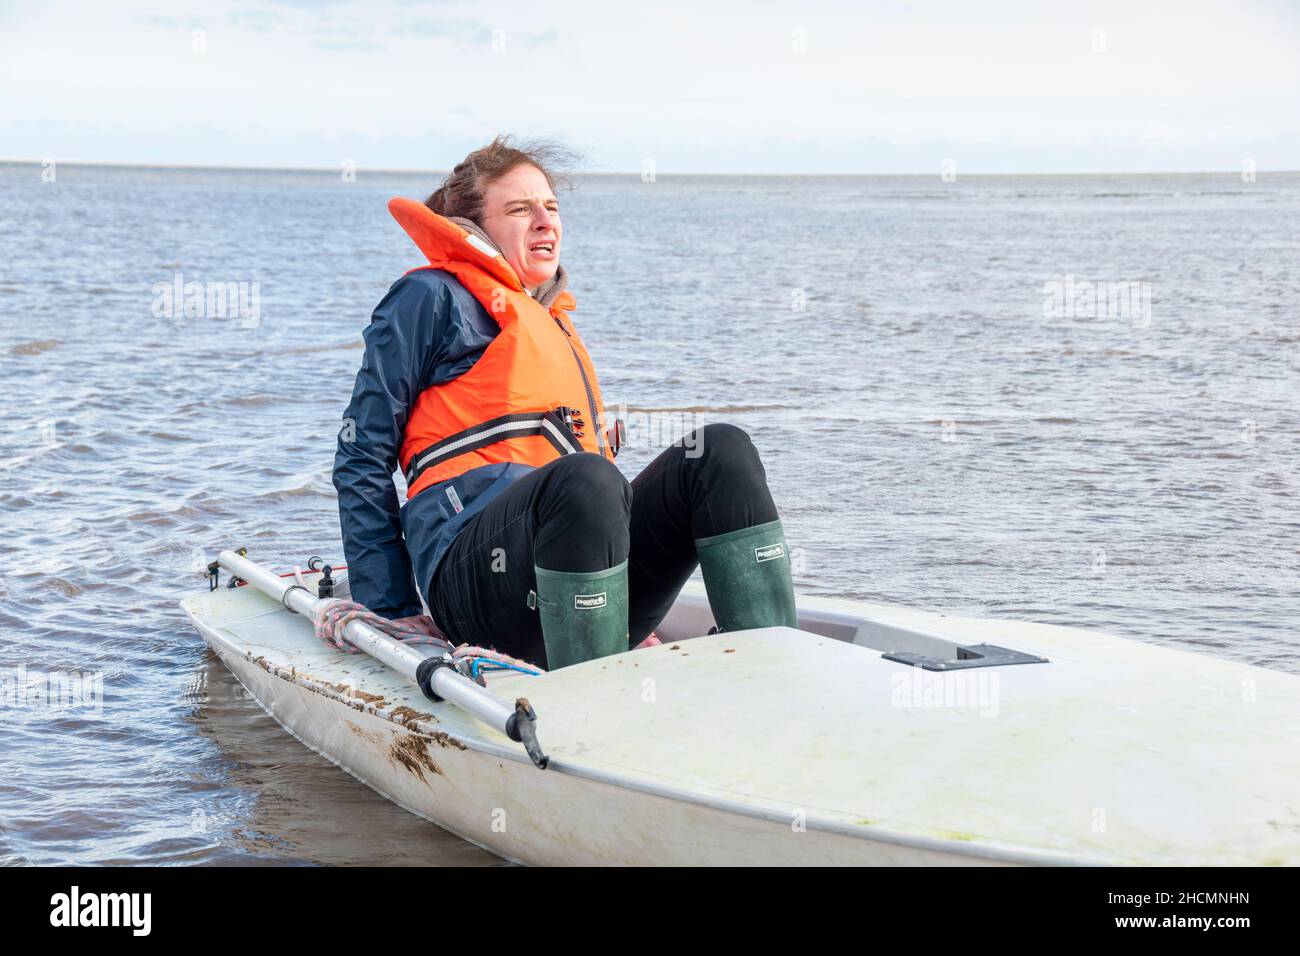 Lincolnshire, UK – 14 Sept 2017 : Anca Nana Vaida yelps as water leaks into her boat on location filming Taking to the Boats by Wellred Films, Cleetho Stock Photo